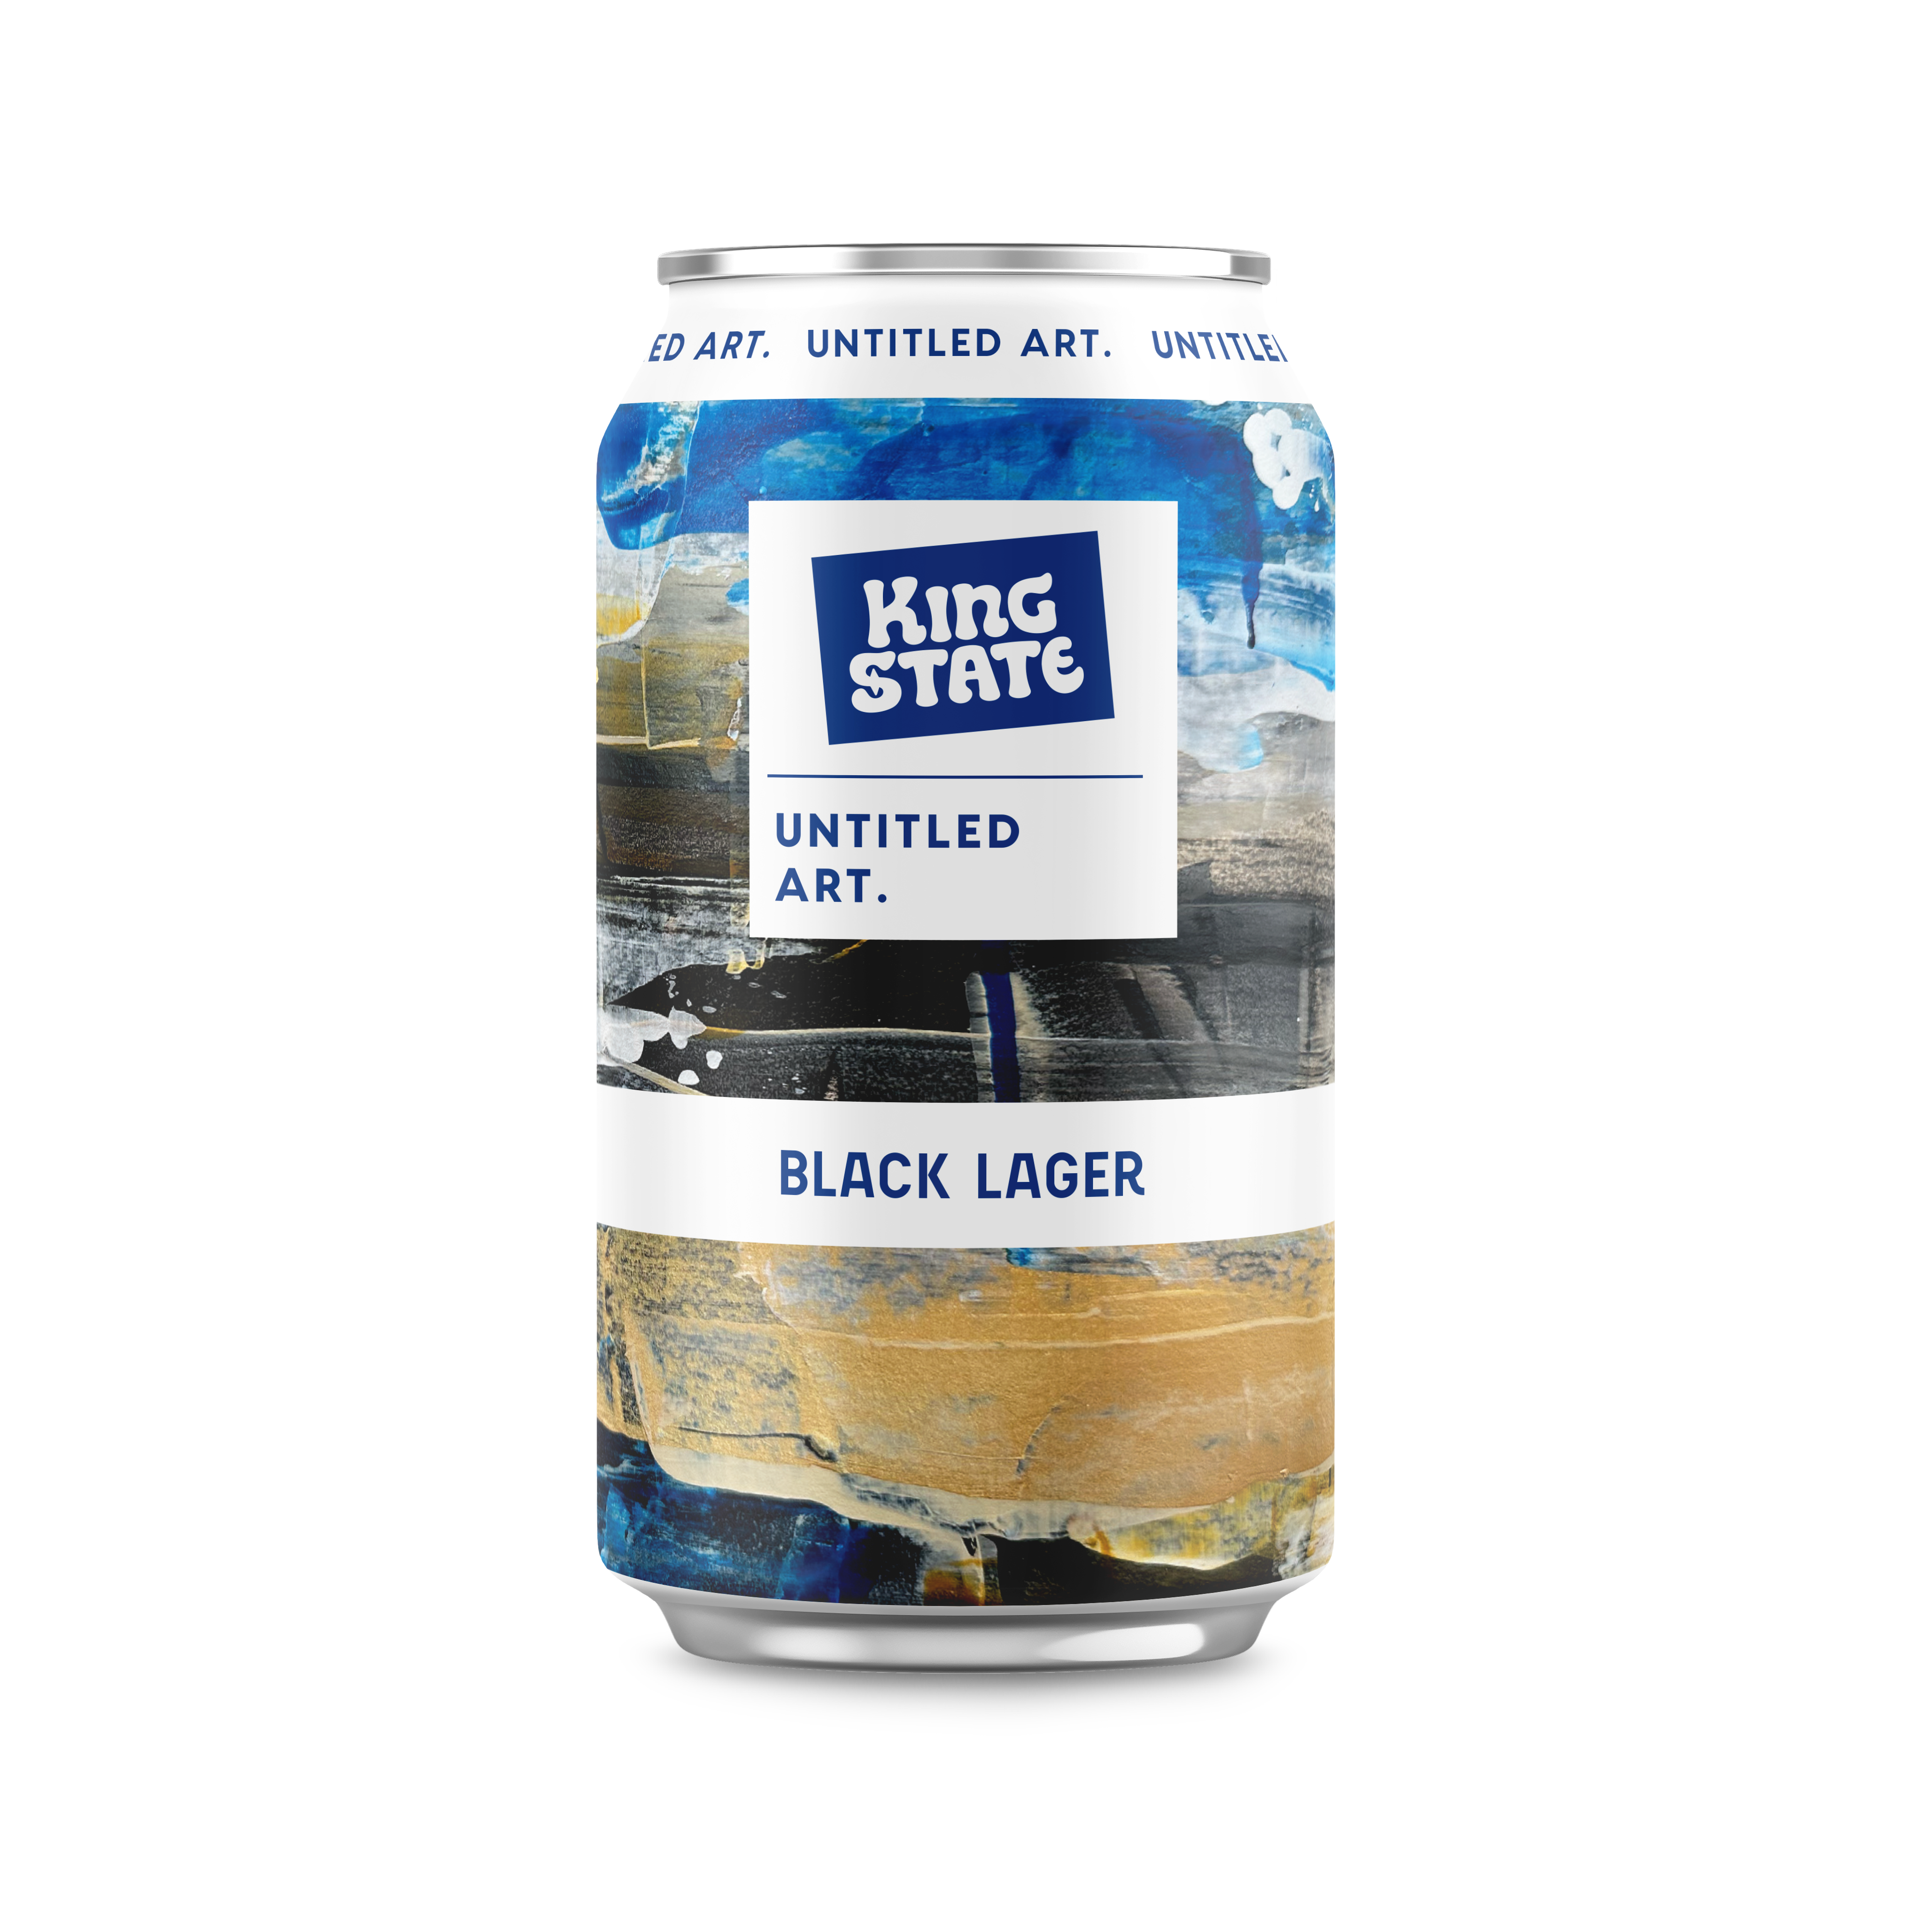 Black Lager can